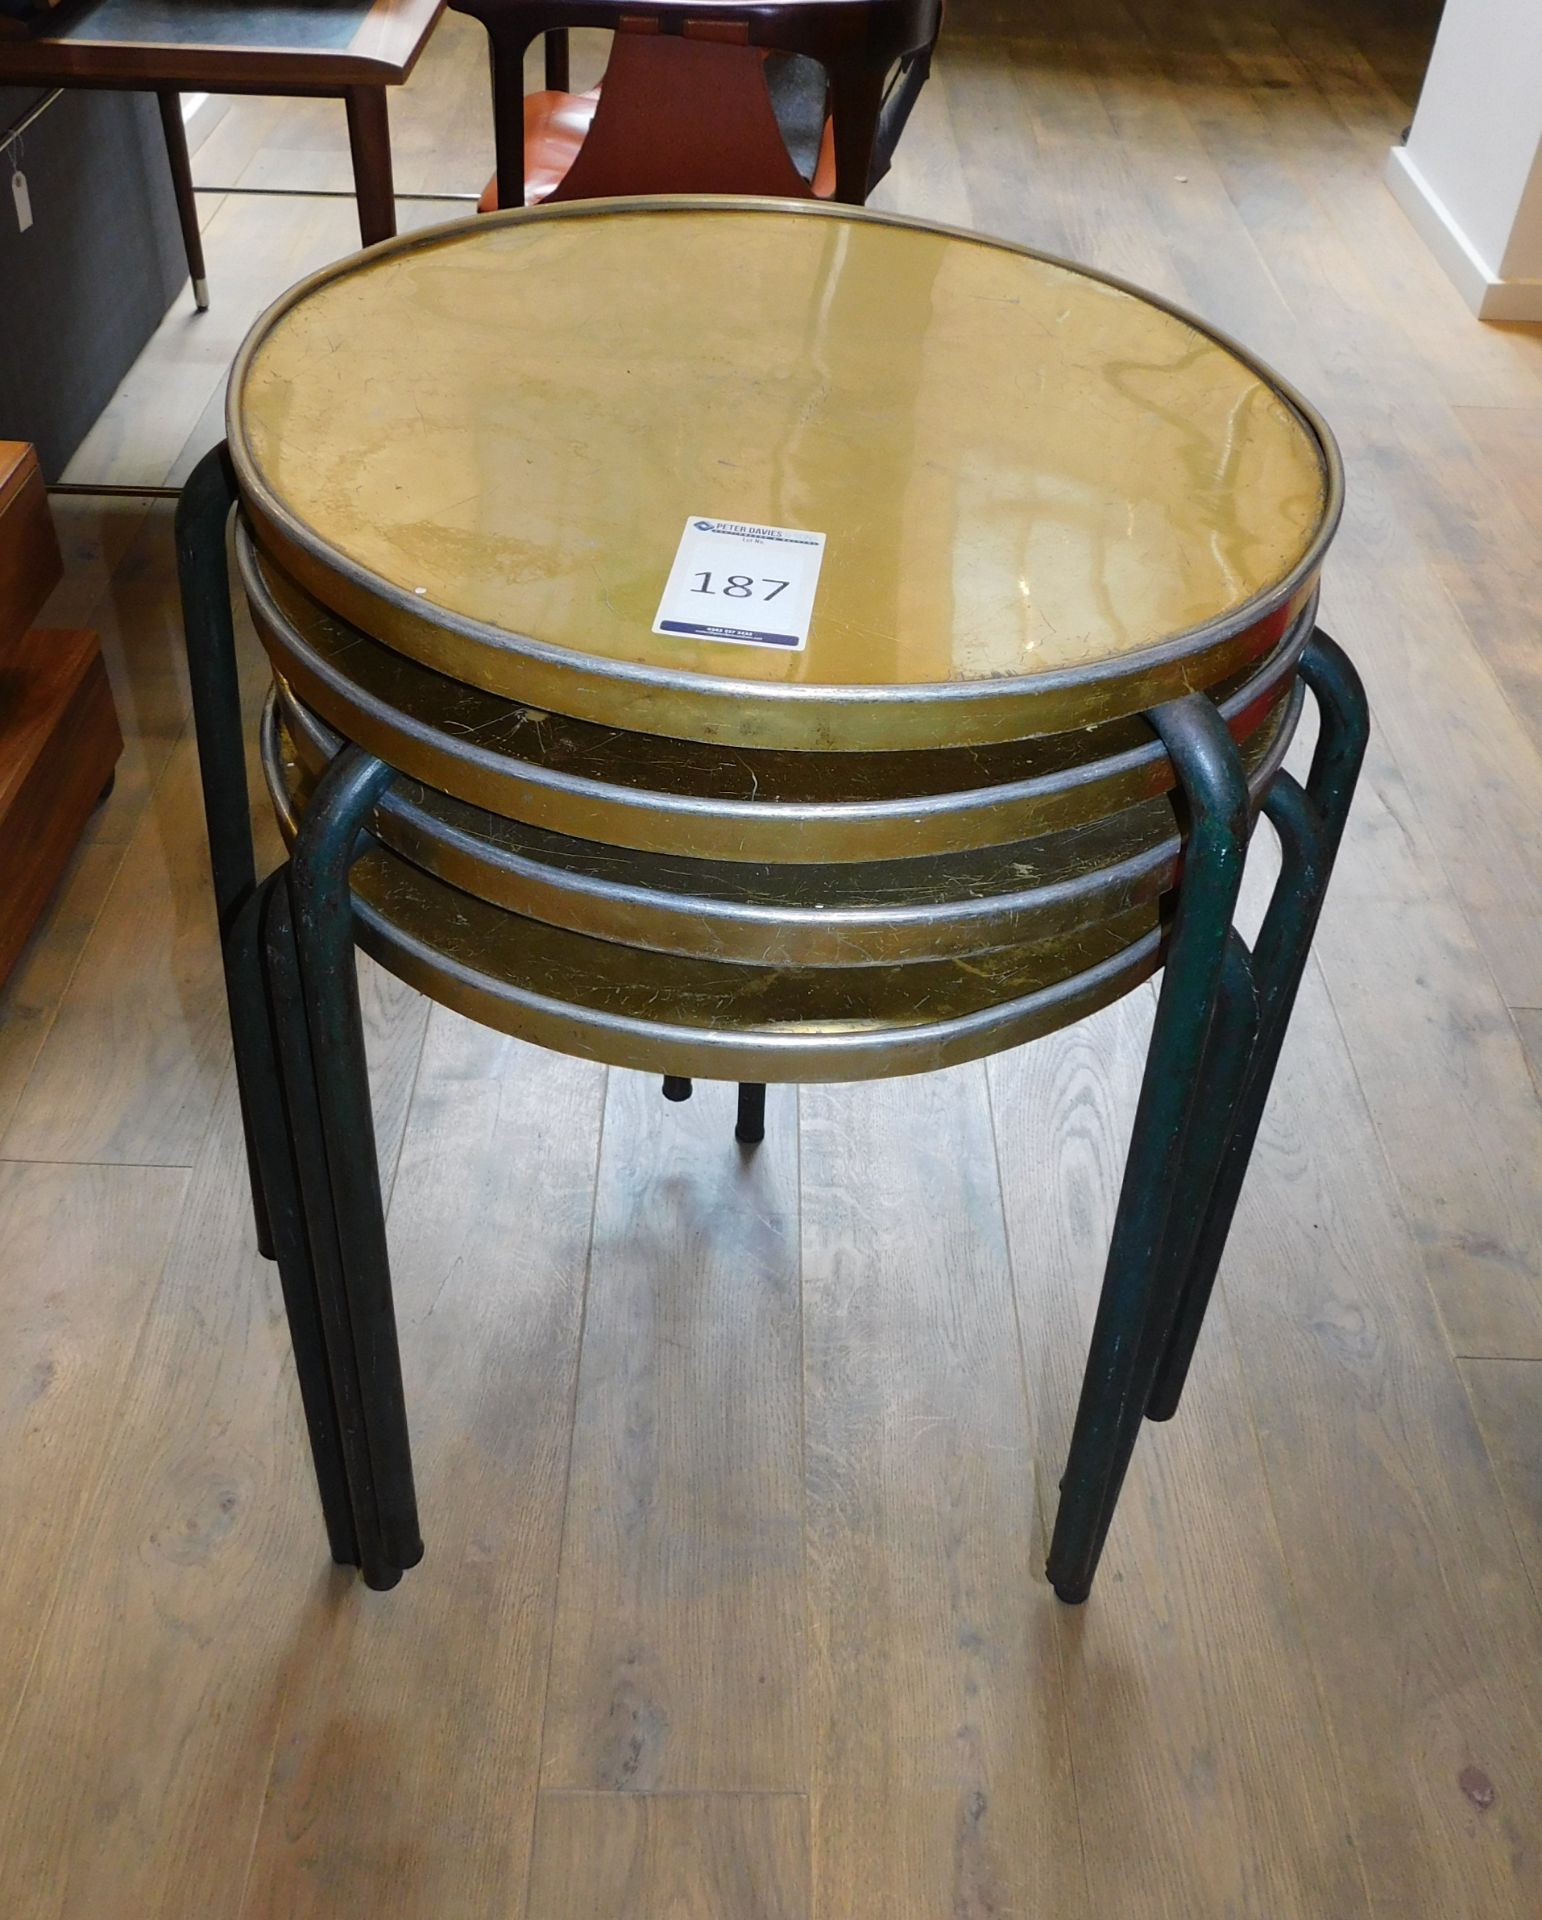 4 Circular Coffee Tables on Metal Supports (Located at 155 Farringdon Road, London, EC1R 3AF)